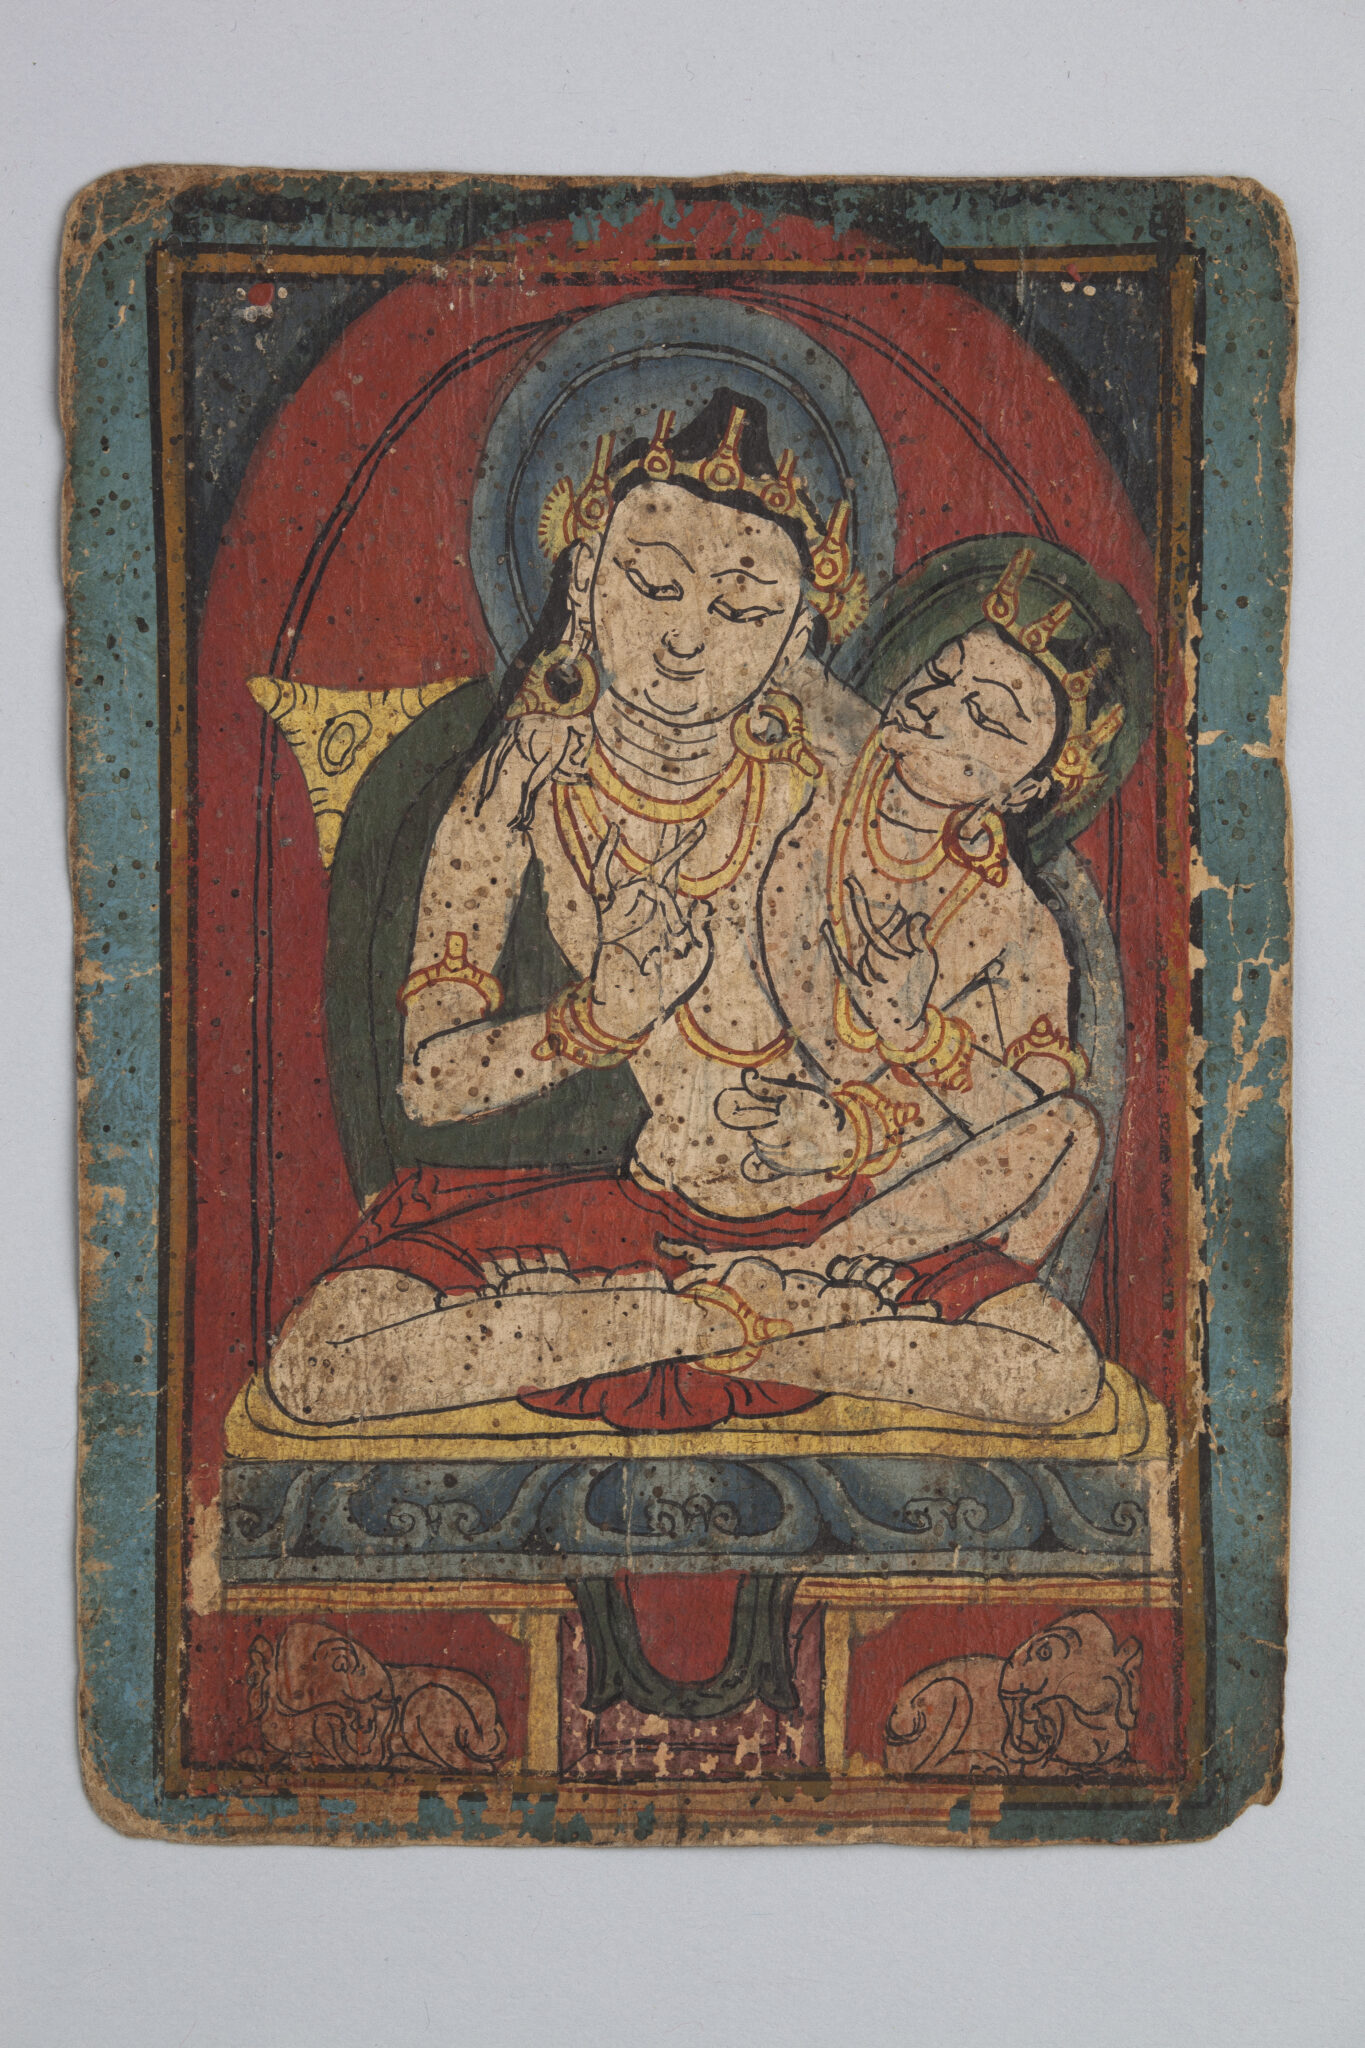 Buddha wearing crown and golden necklaces, left hand held in mudra at chest, consort appearing from behind right shoulder